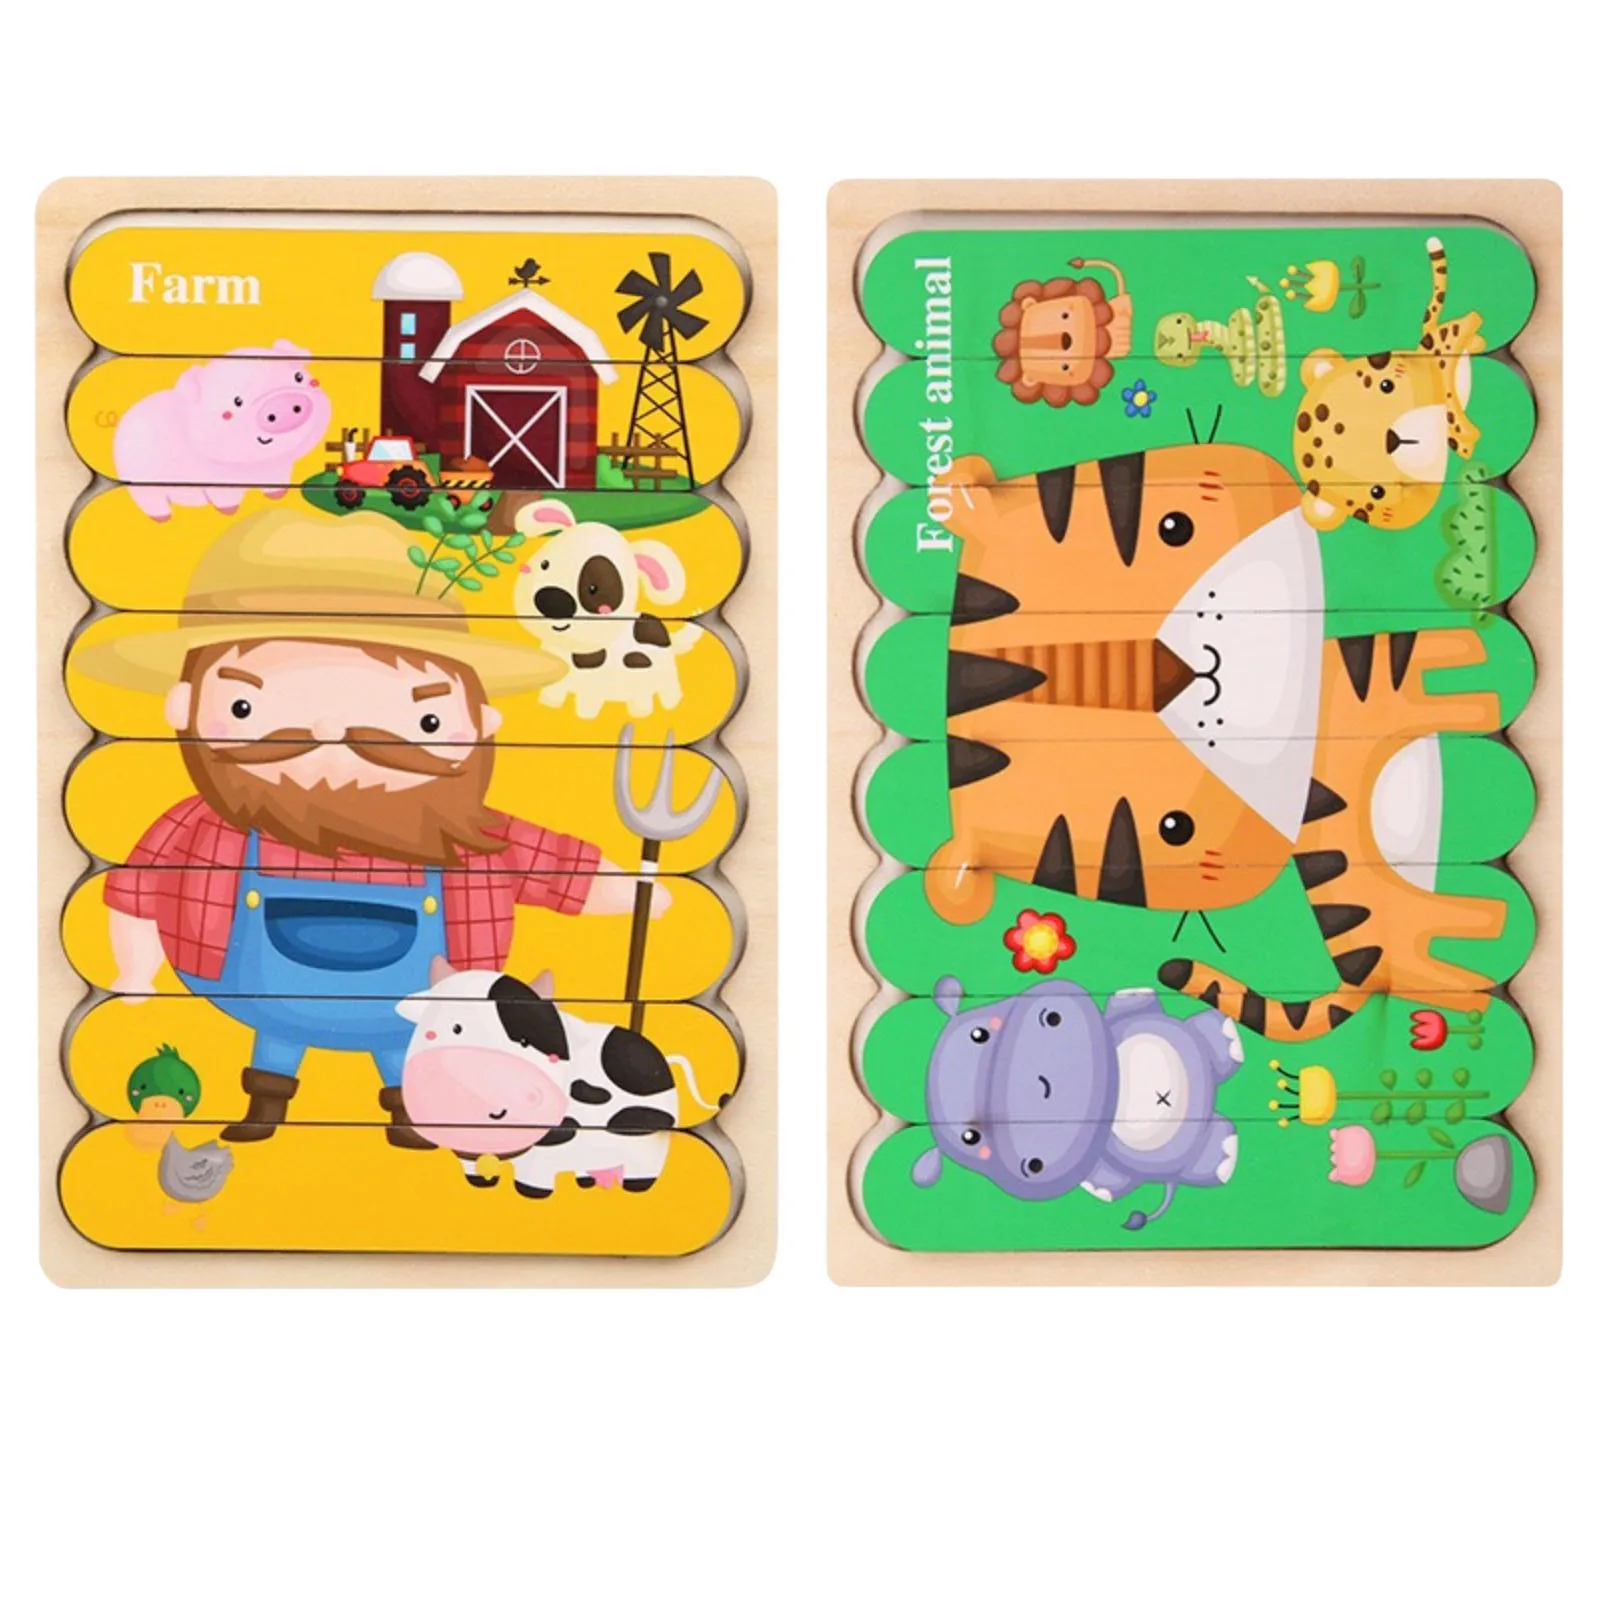 

Pattern Sorting Preschool Puzzles Peg Girls Toys Montessori Kids Toys Puzzle For Toddlers Educational Stacking And 3d Toy 1300